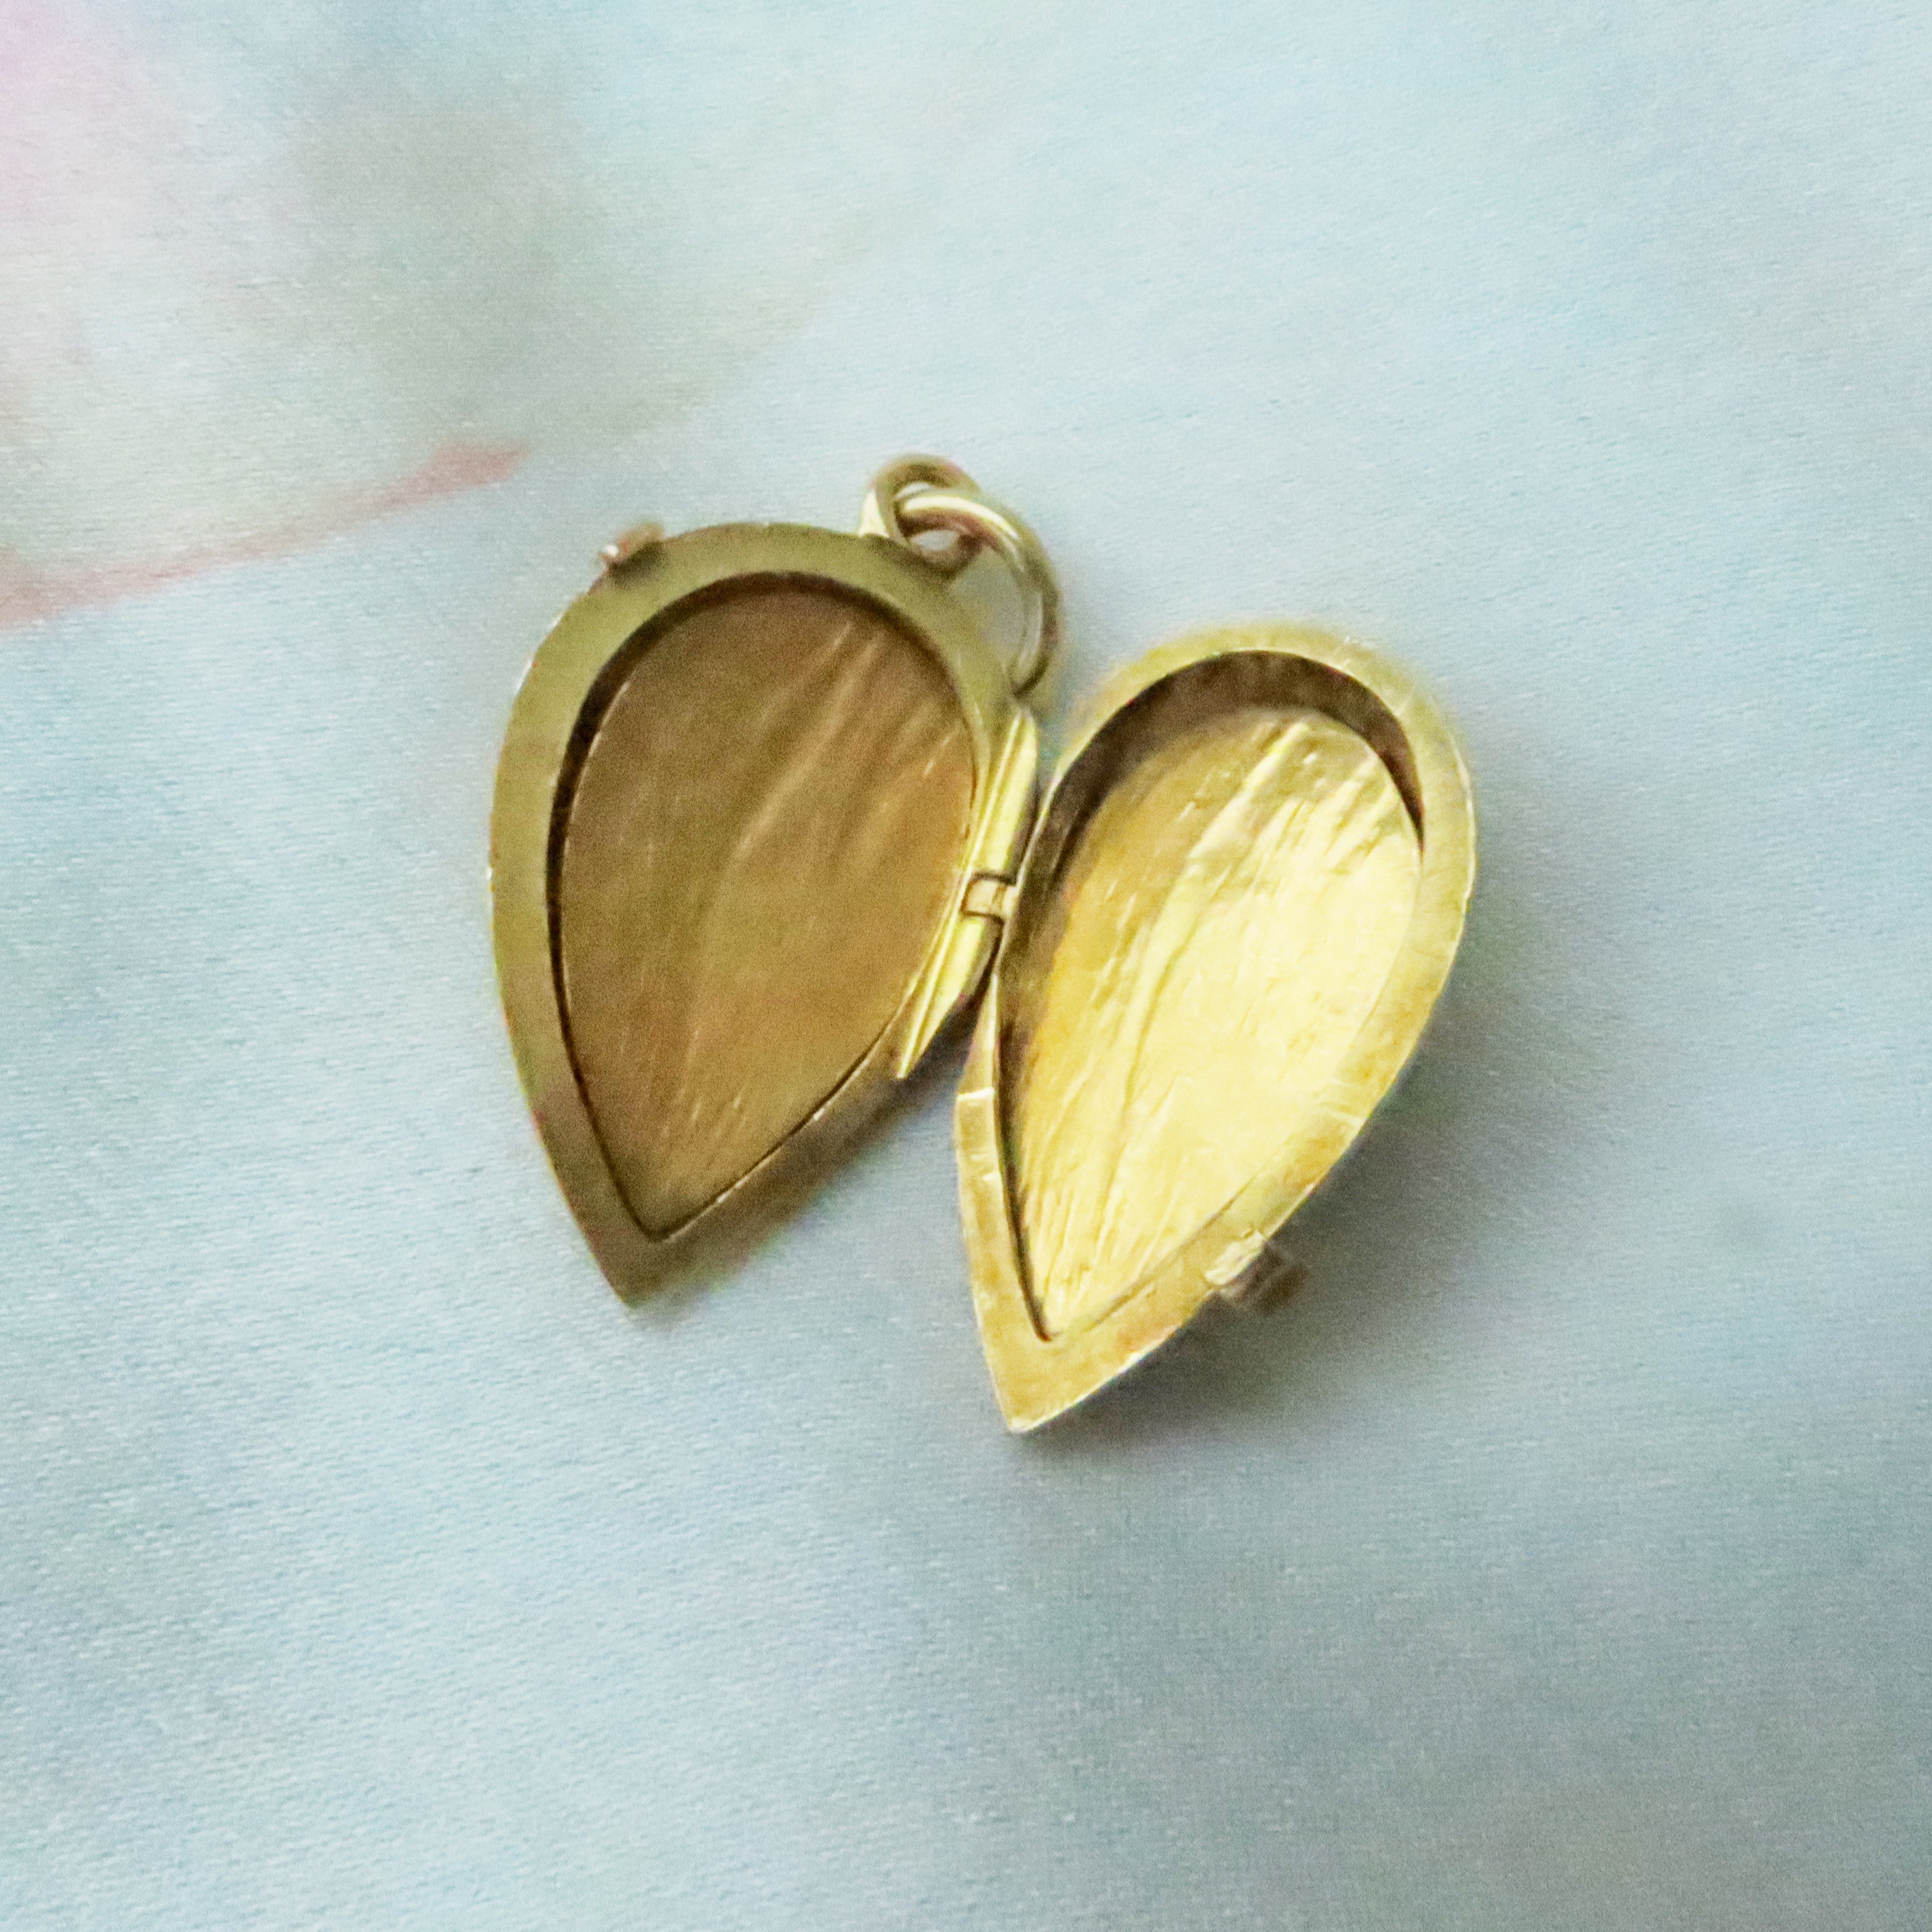 18ct almond pendant / charm with nuts inside - open to interior